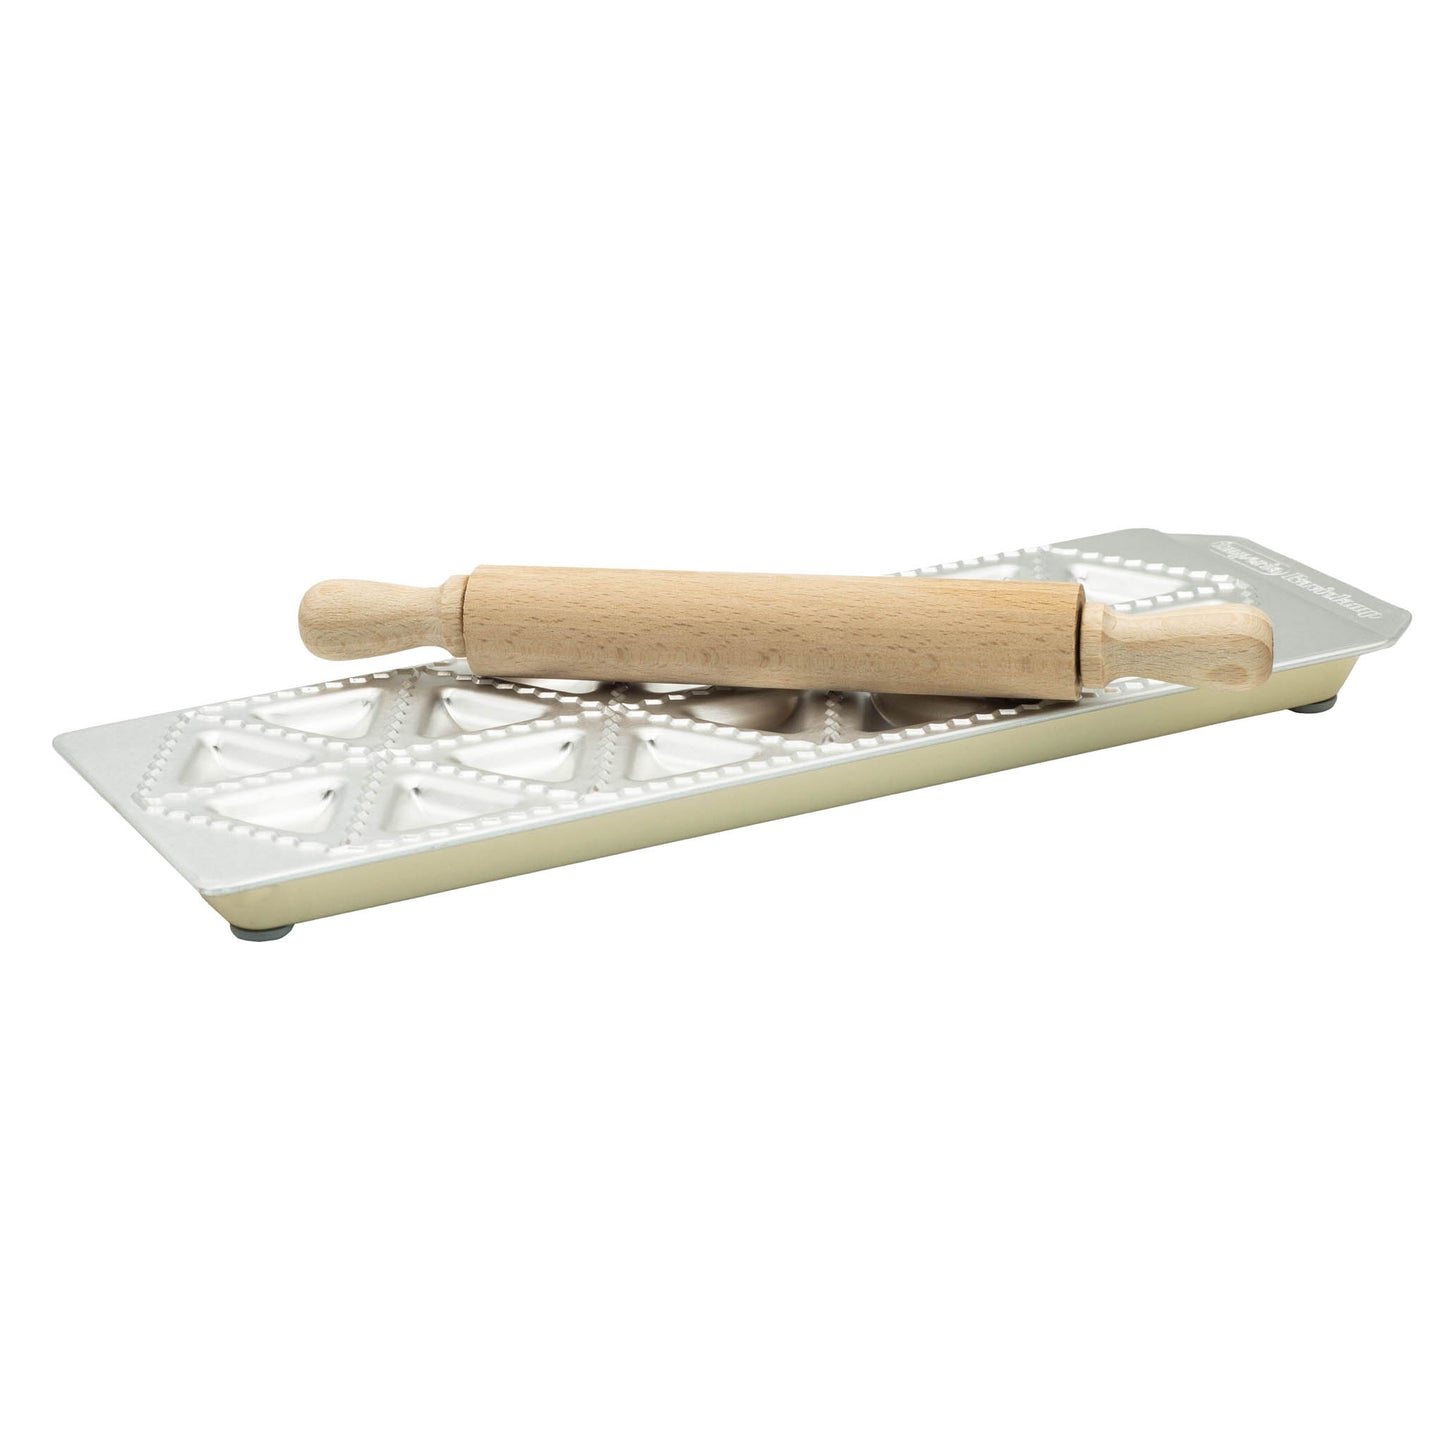 Imperia ravioli tortelli mould with non slip feet and wooden rolling pin. 